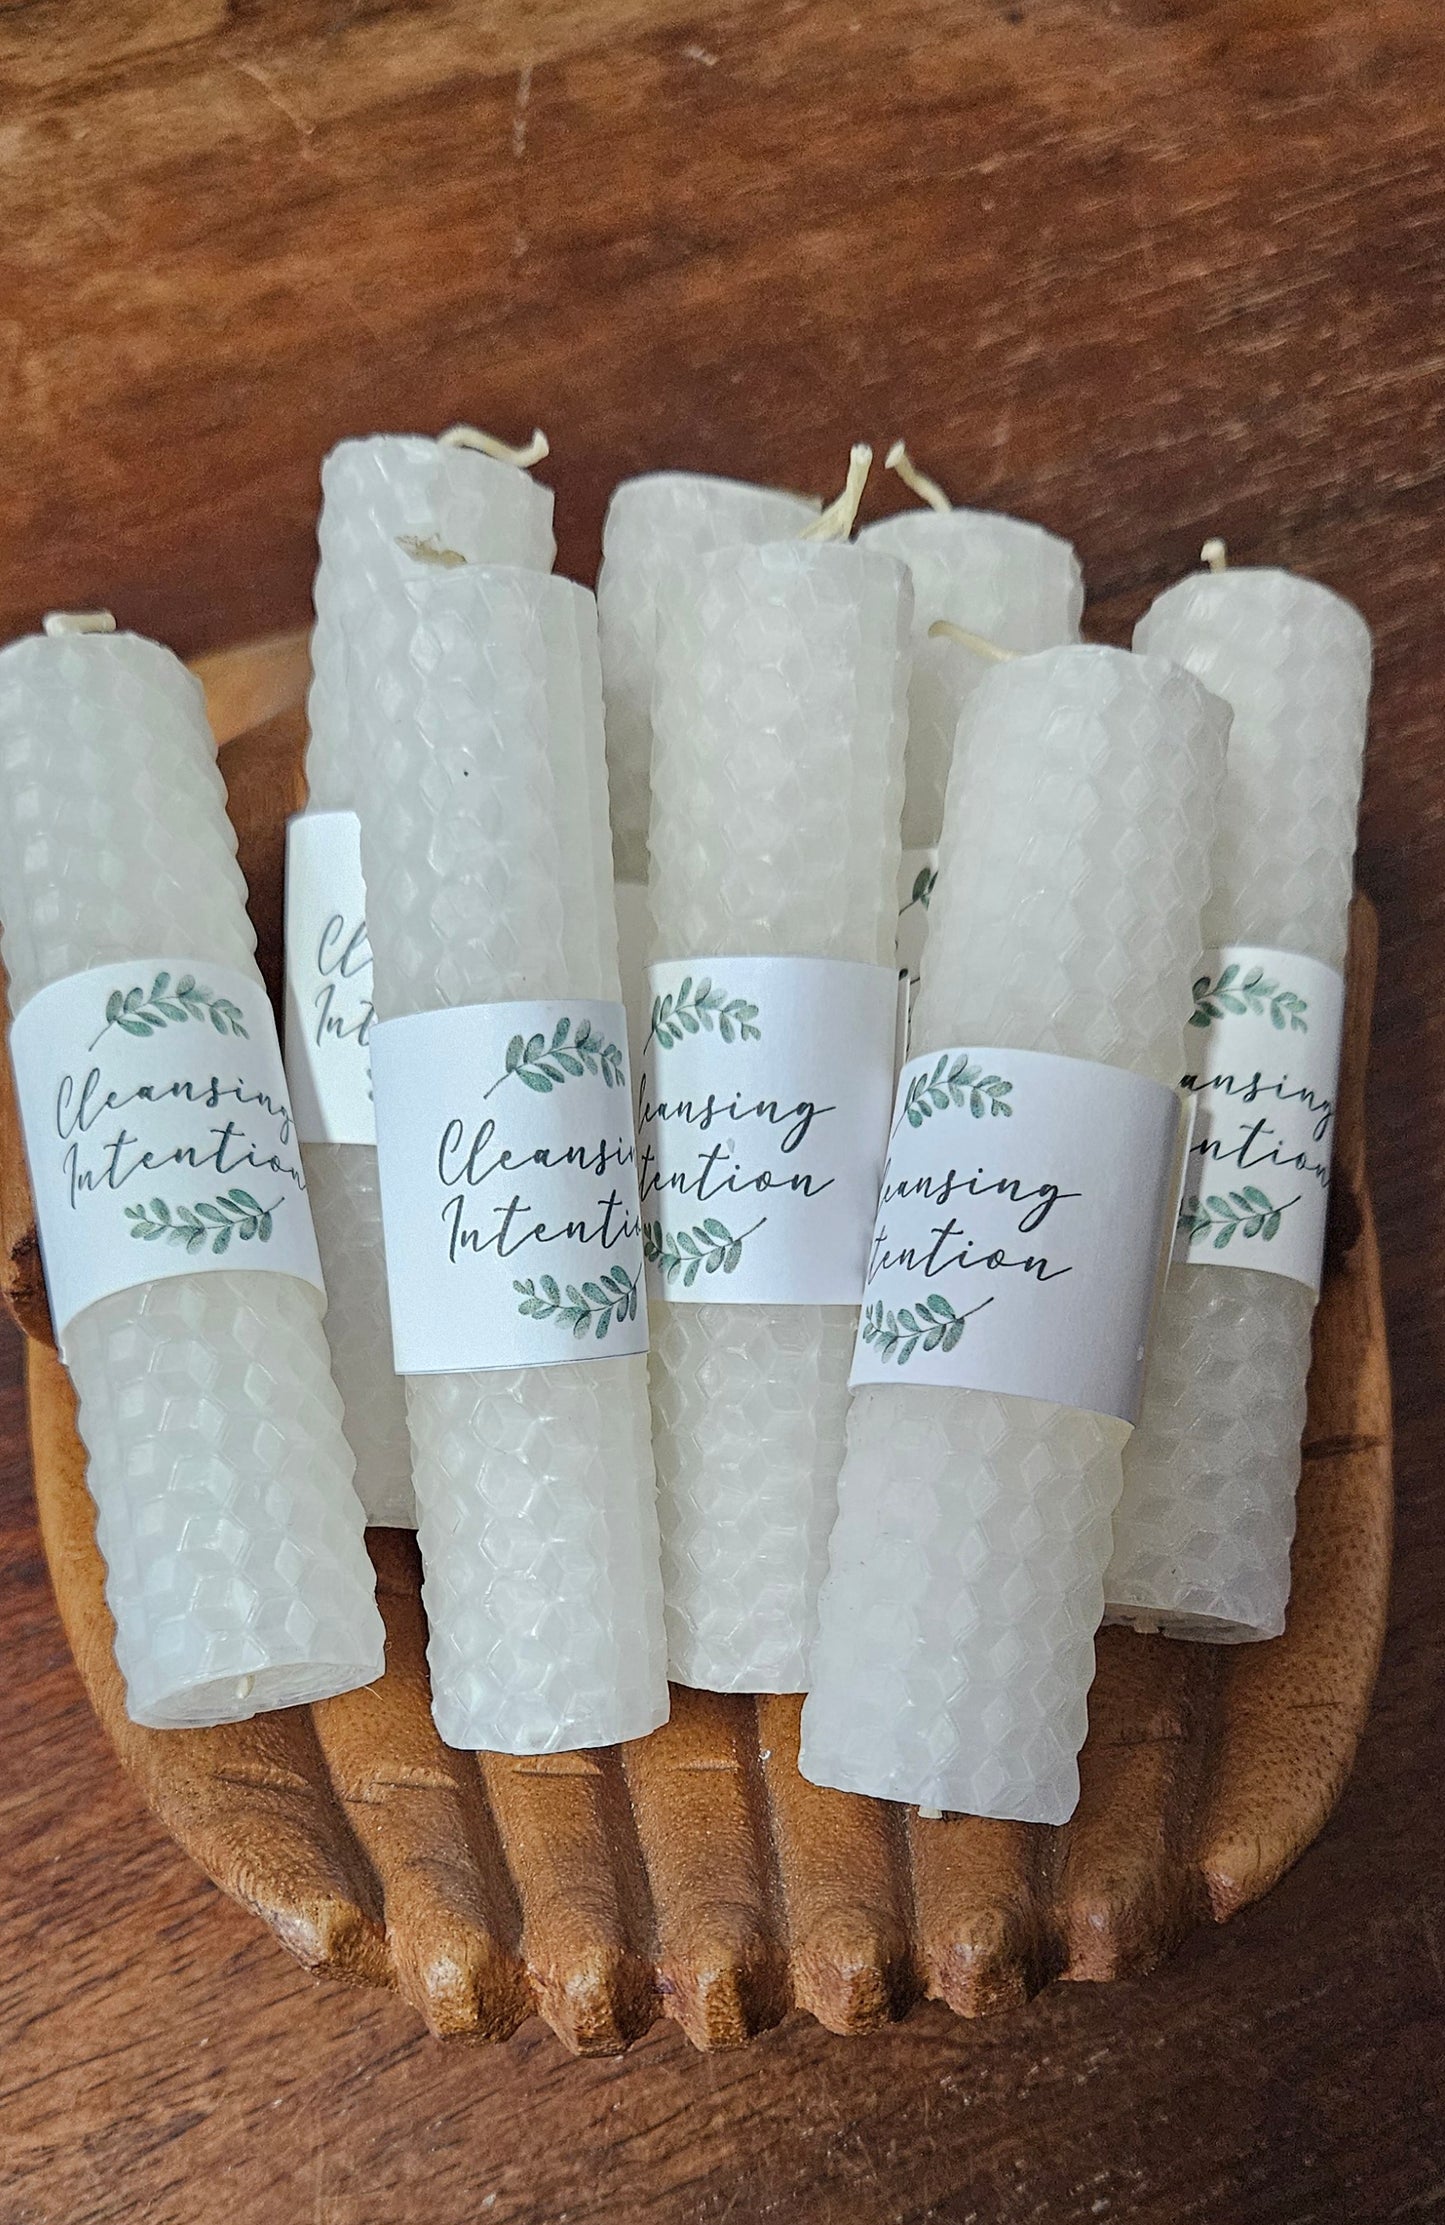 Reiki Infused Intention Beeswax Candle - Cleansing - 4" Hand Rolled